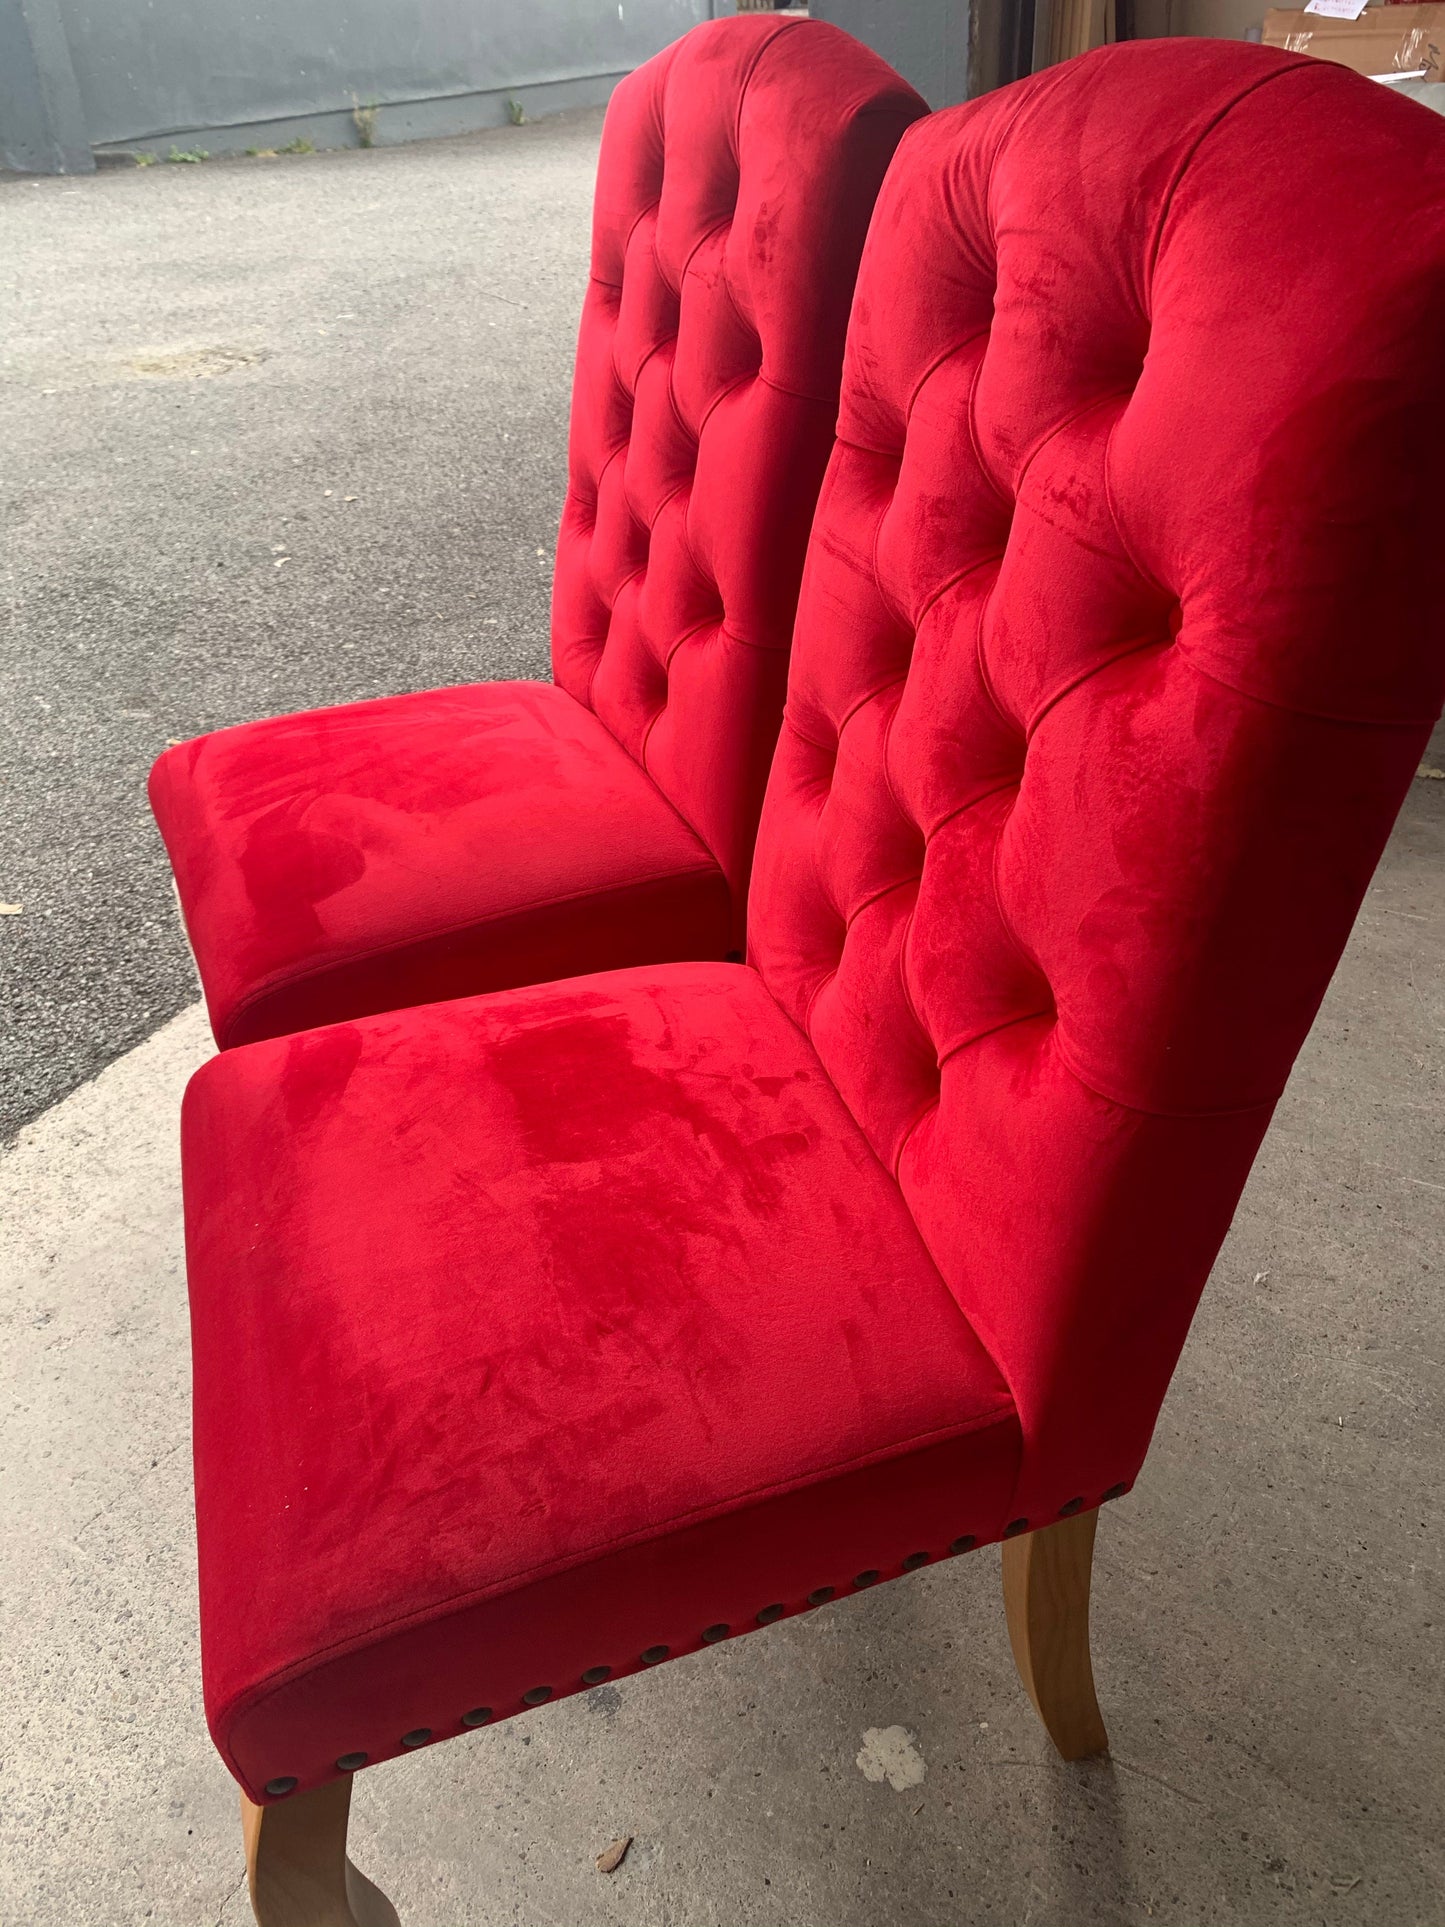 Stunning Red velvet chairs CLEARANCE collection only